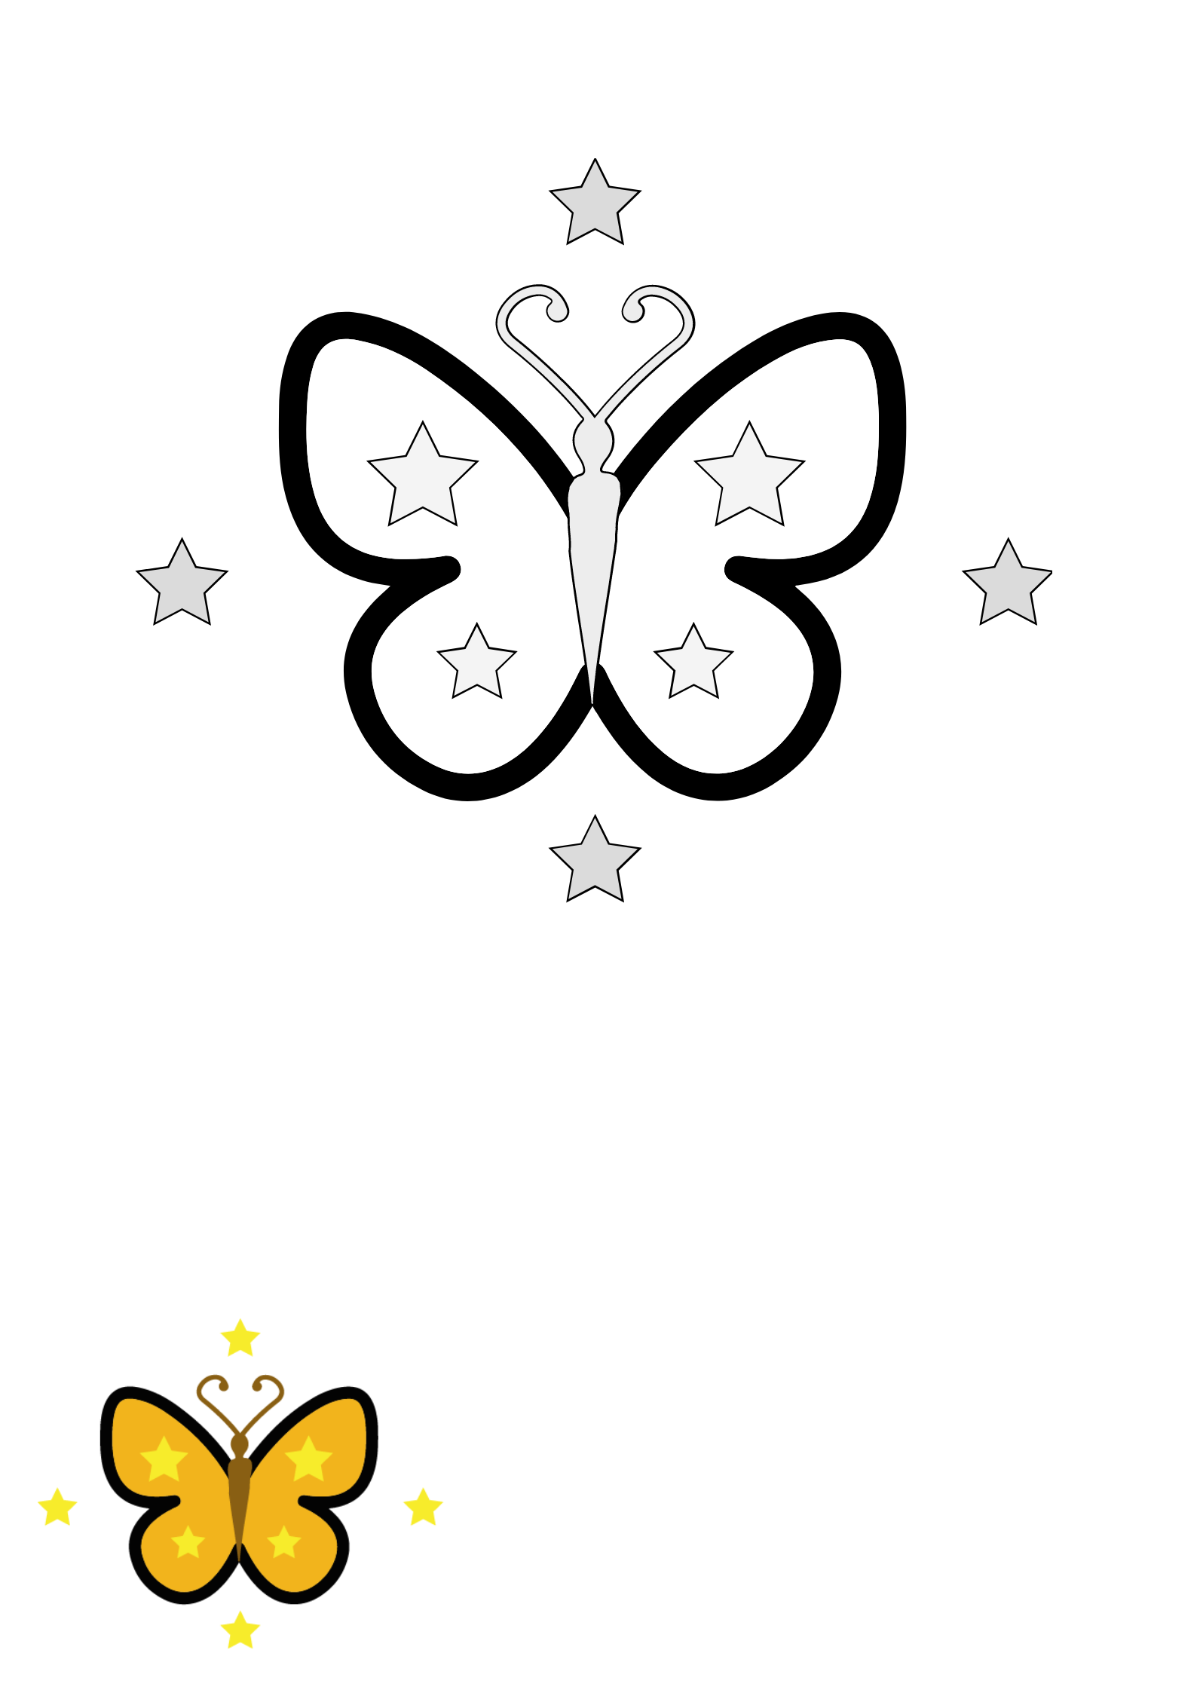 Star Butterfly Coloring Page Template